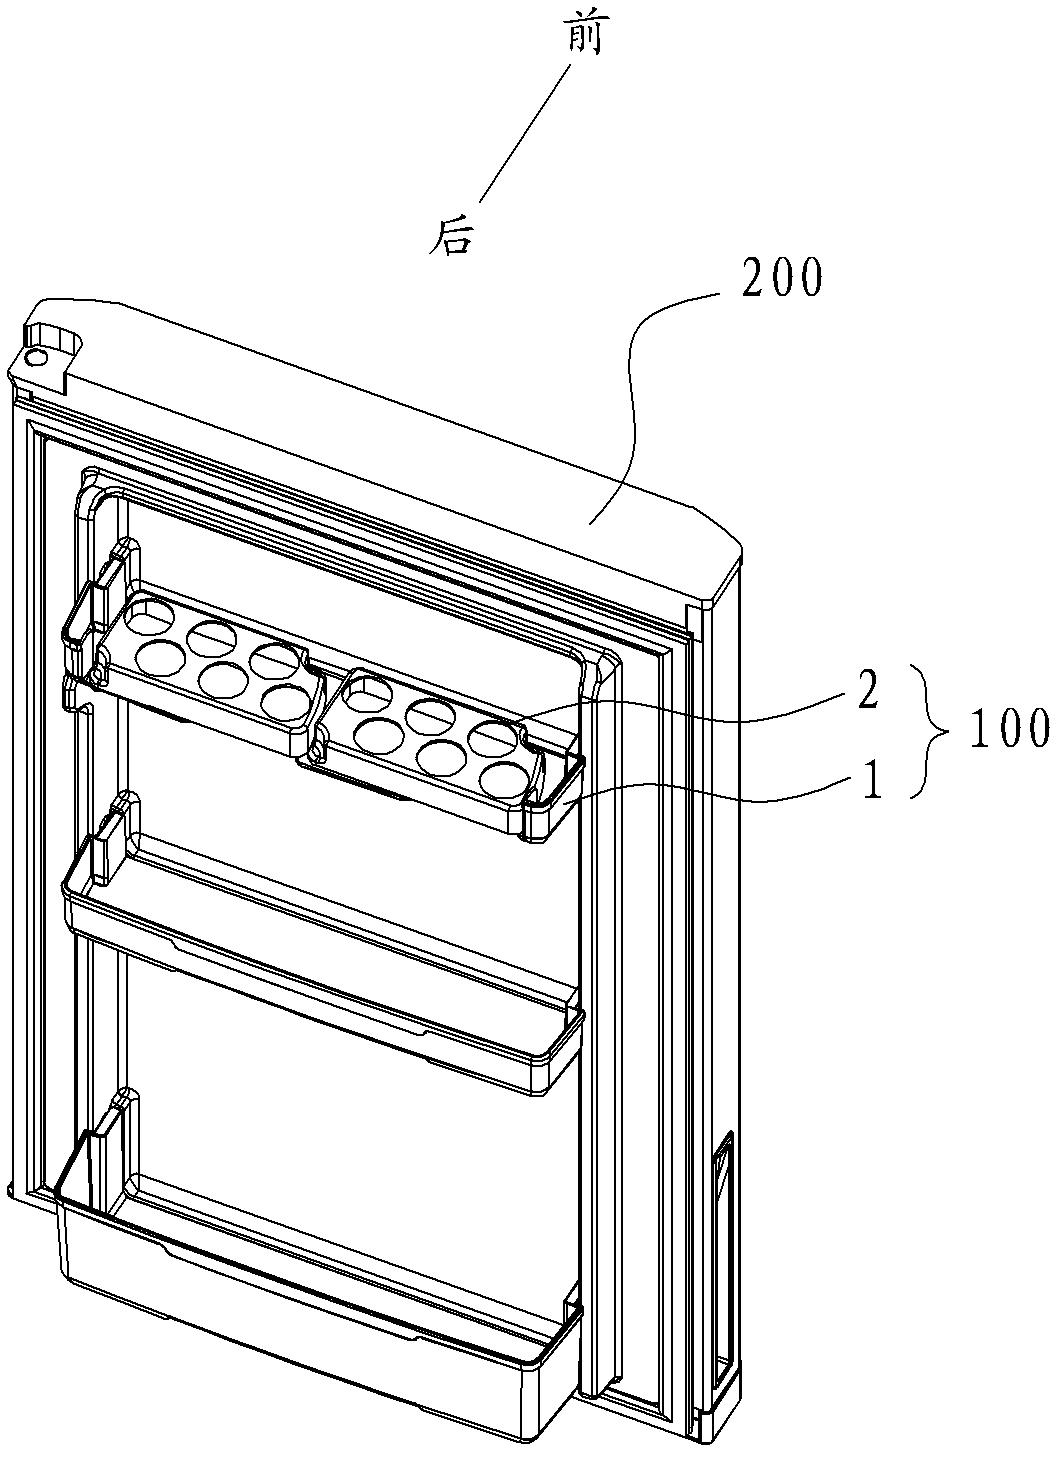 Egg rack assembly used for refrigerator and refrigerator with same